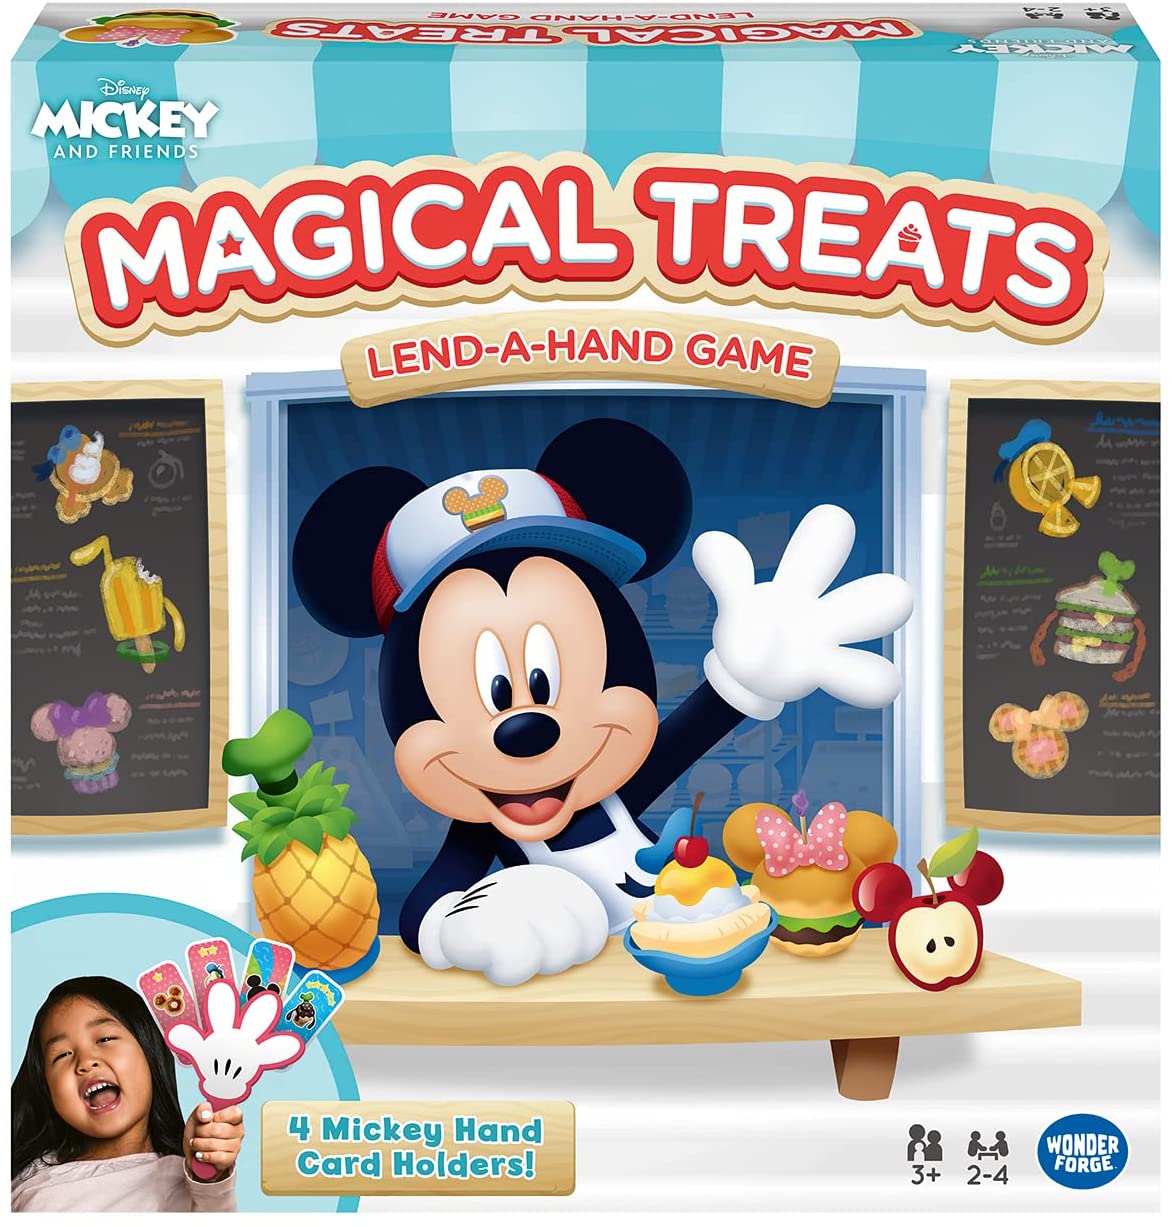 Game - Mickey's Magical Treats